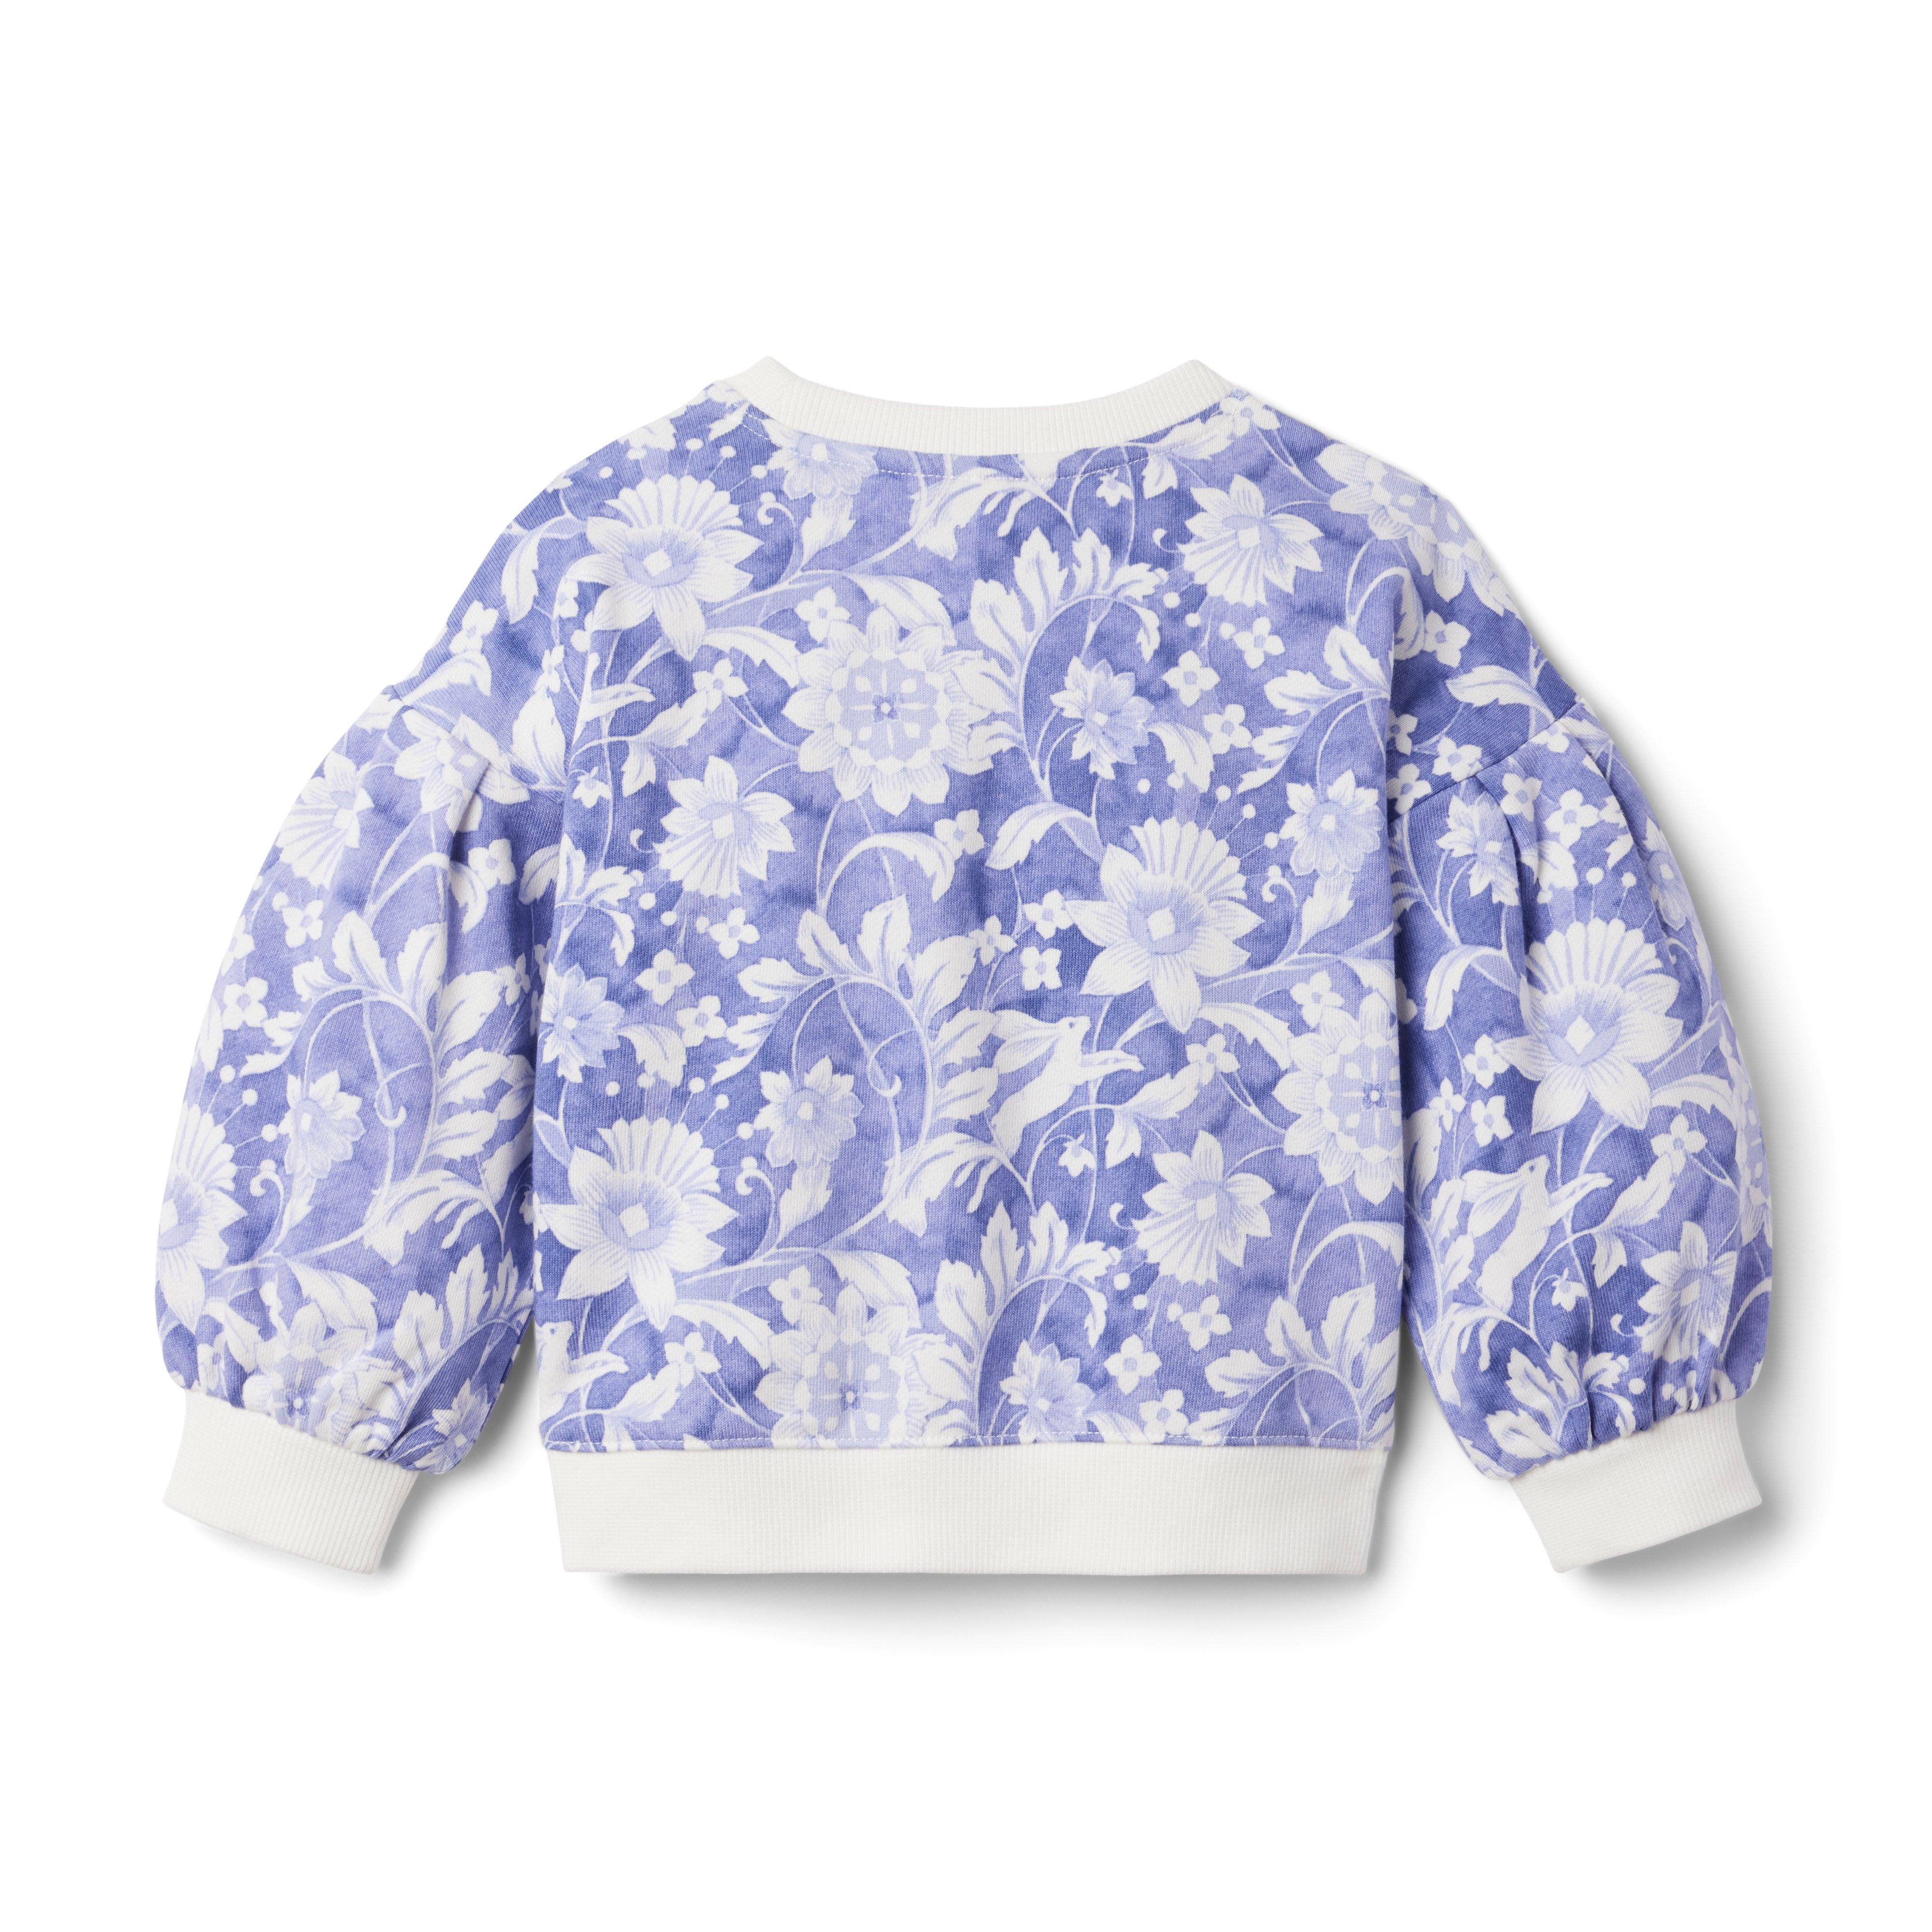 Long Puff Sleeve Sweatshirt in Soft Cotton French Terry